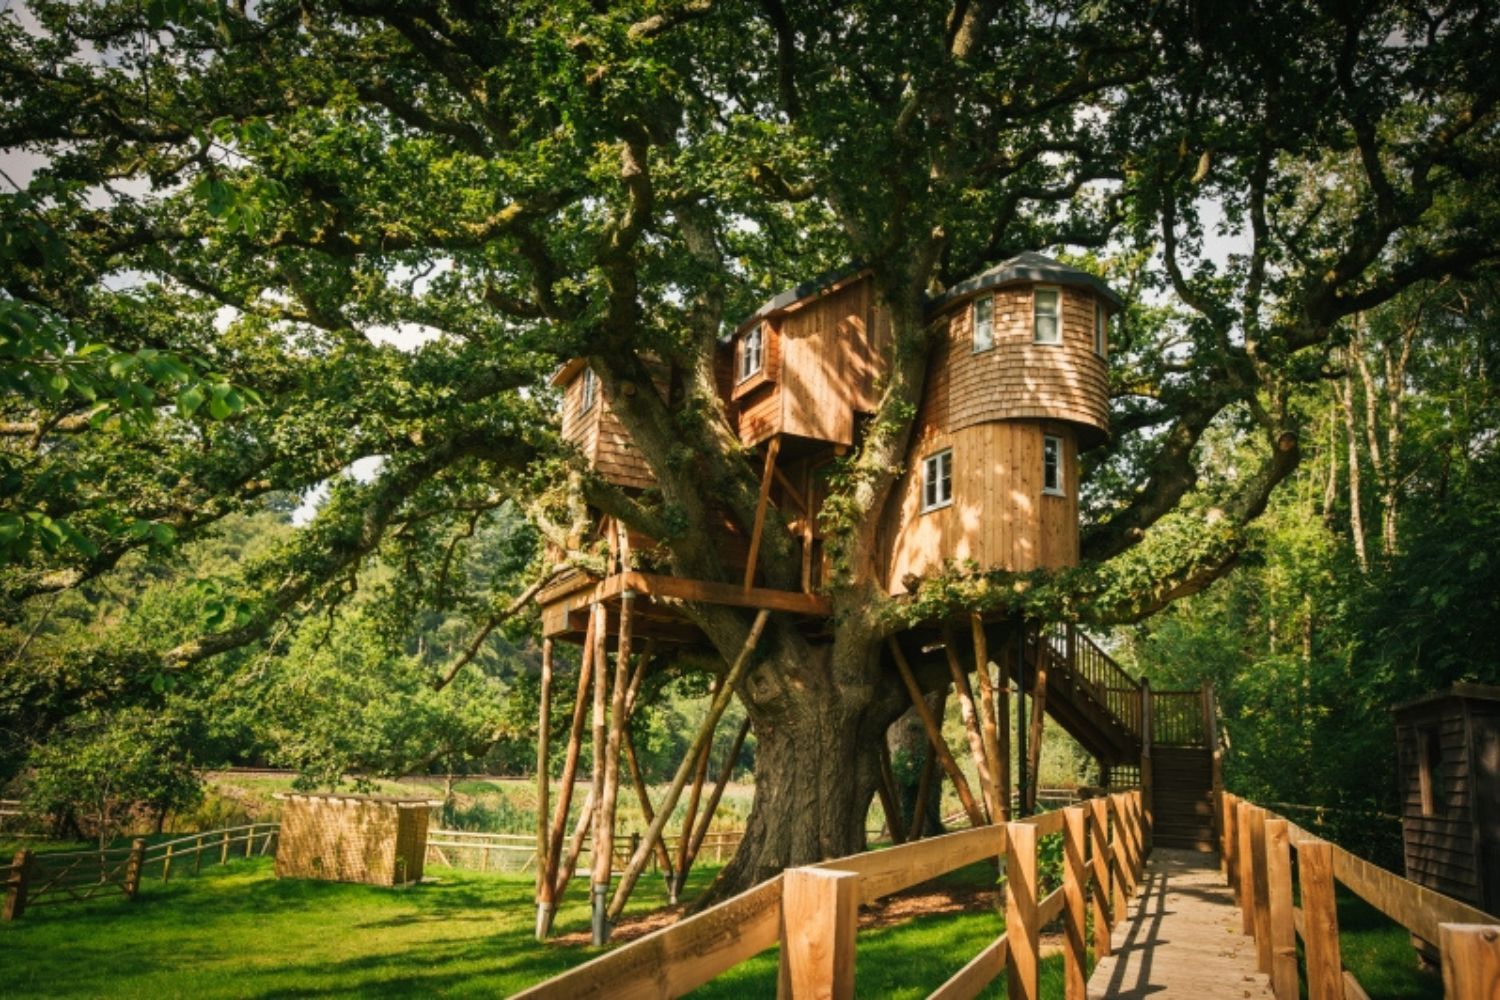 Large wooden two-storey treehouse in big, leafy tree - The Fox and Hounds Hotel, North Devon